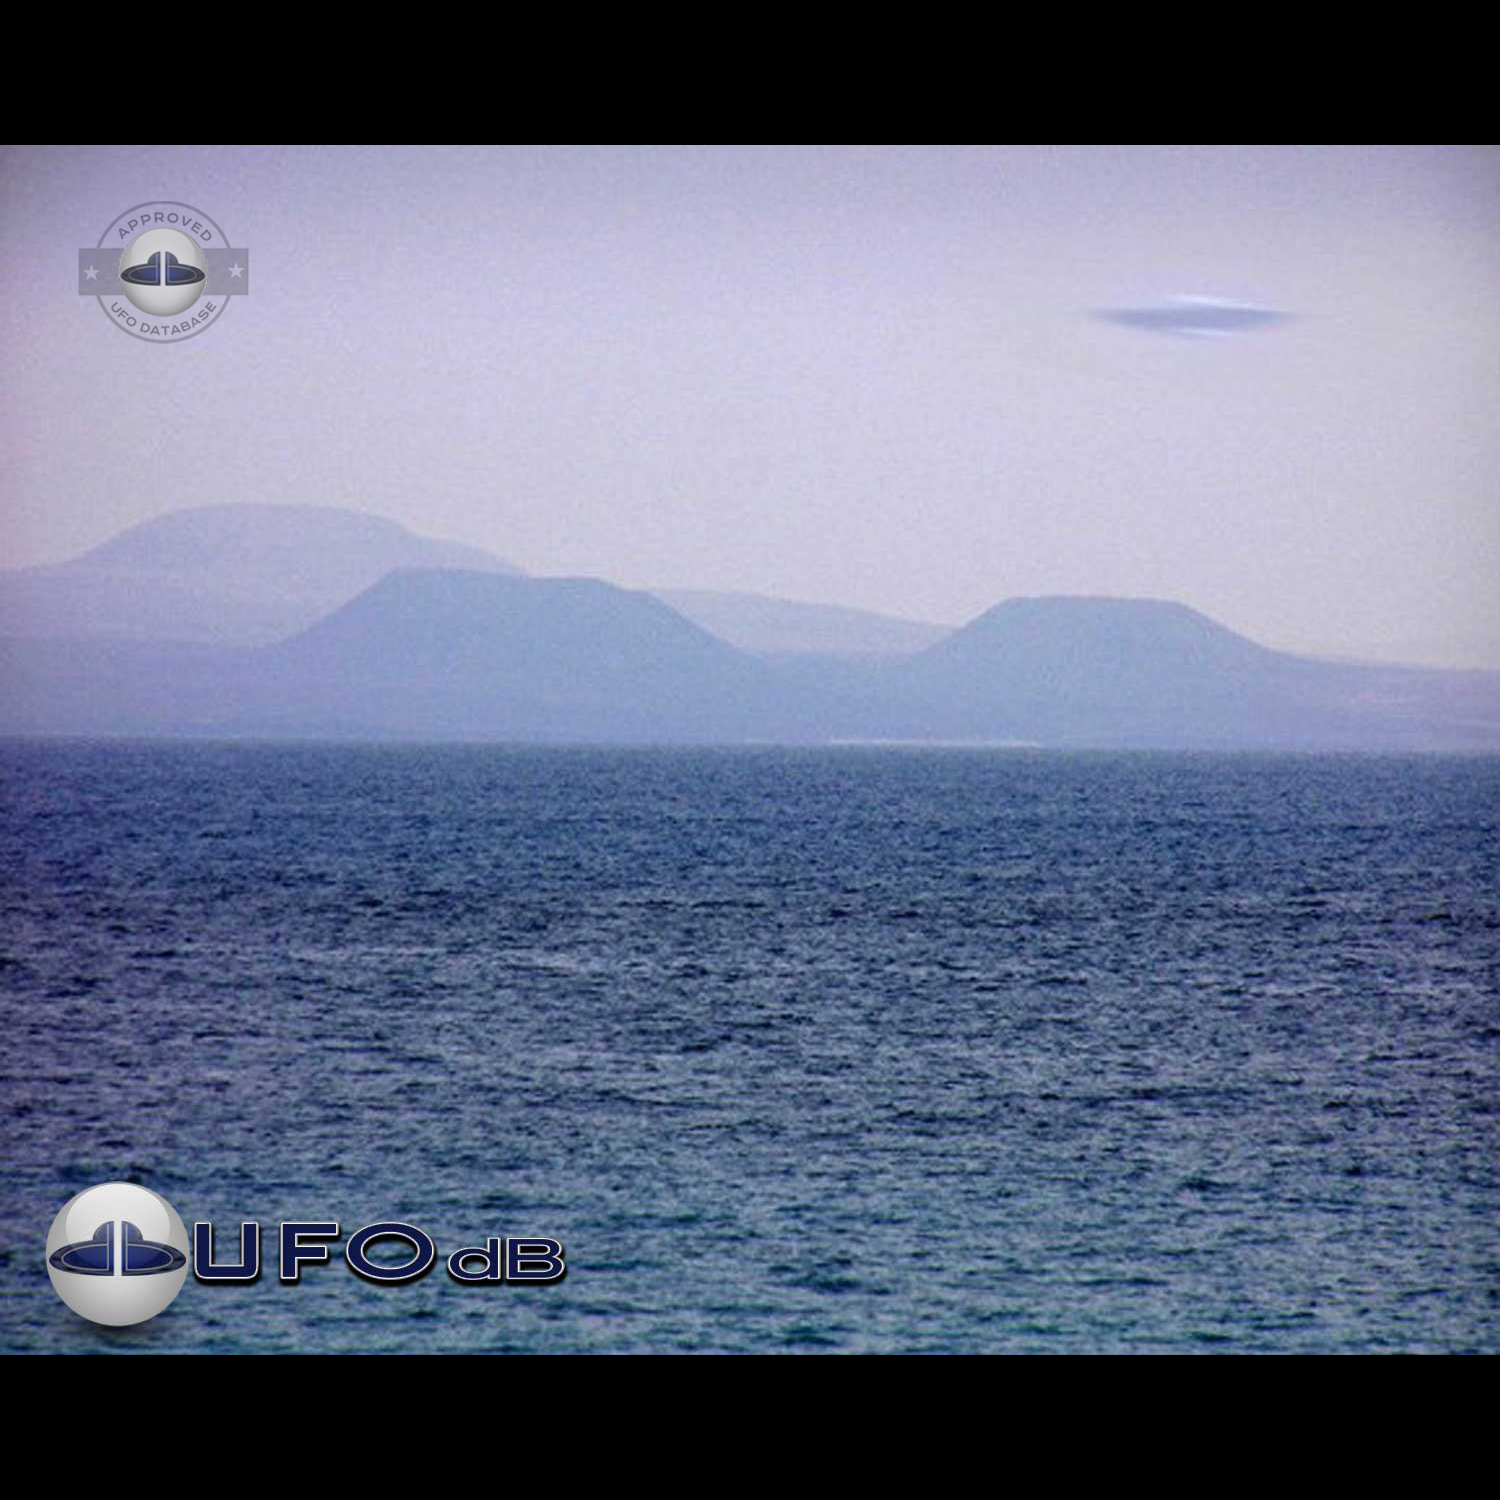 The ufo is moving over the Atlantic ocean in the Canary island UFO Picture #72-1